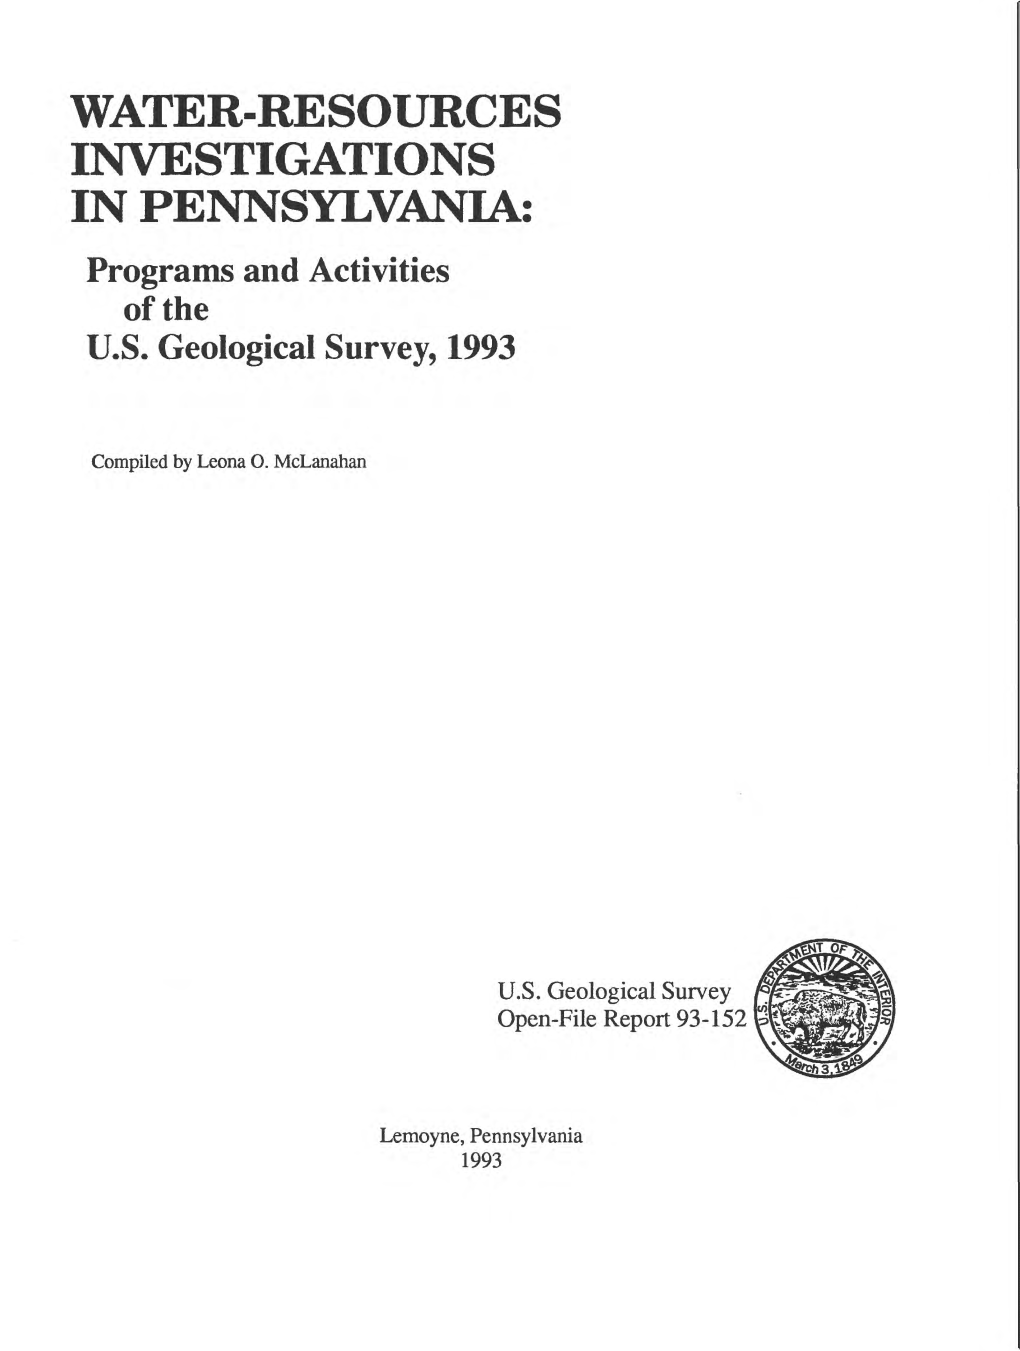 WATER-RESOURCES INVESTIGATIONS in PENNSYLVANIA: Programs and Activities of the U.S